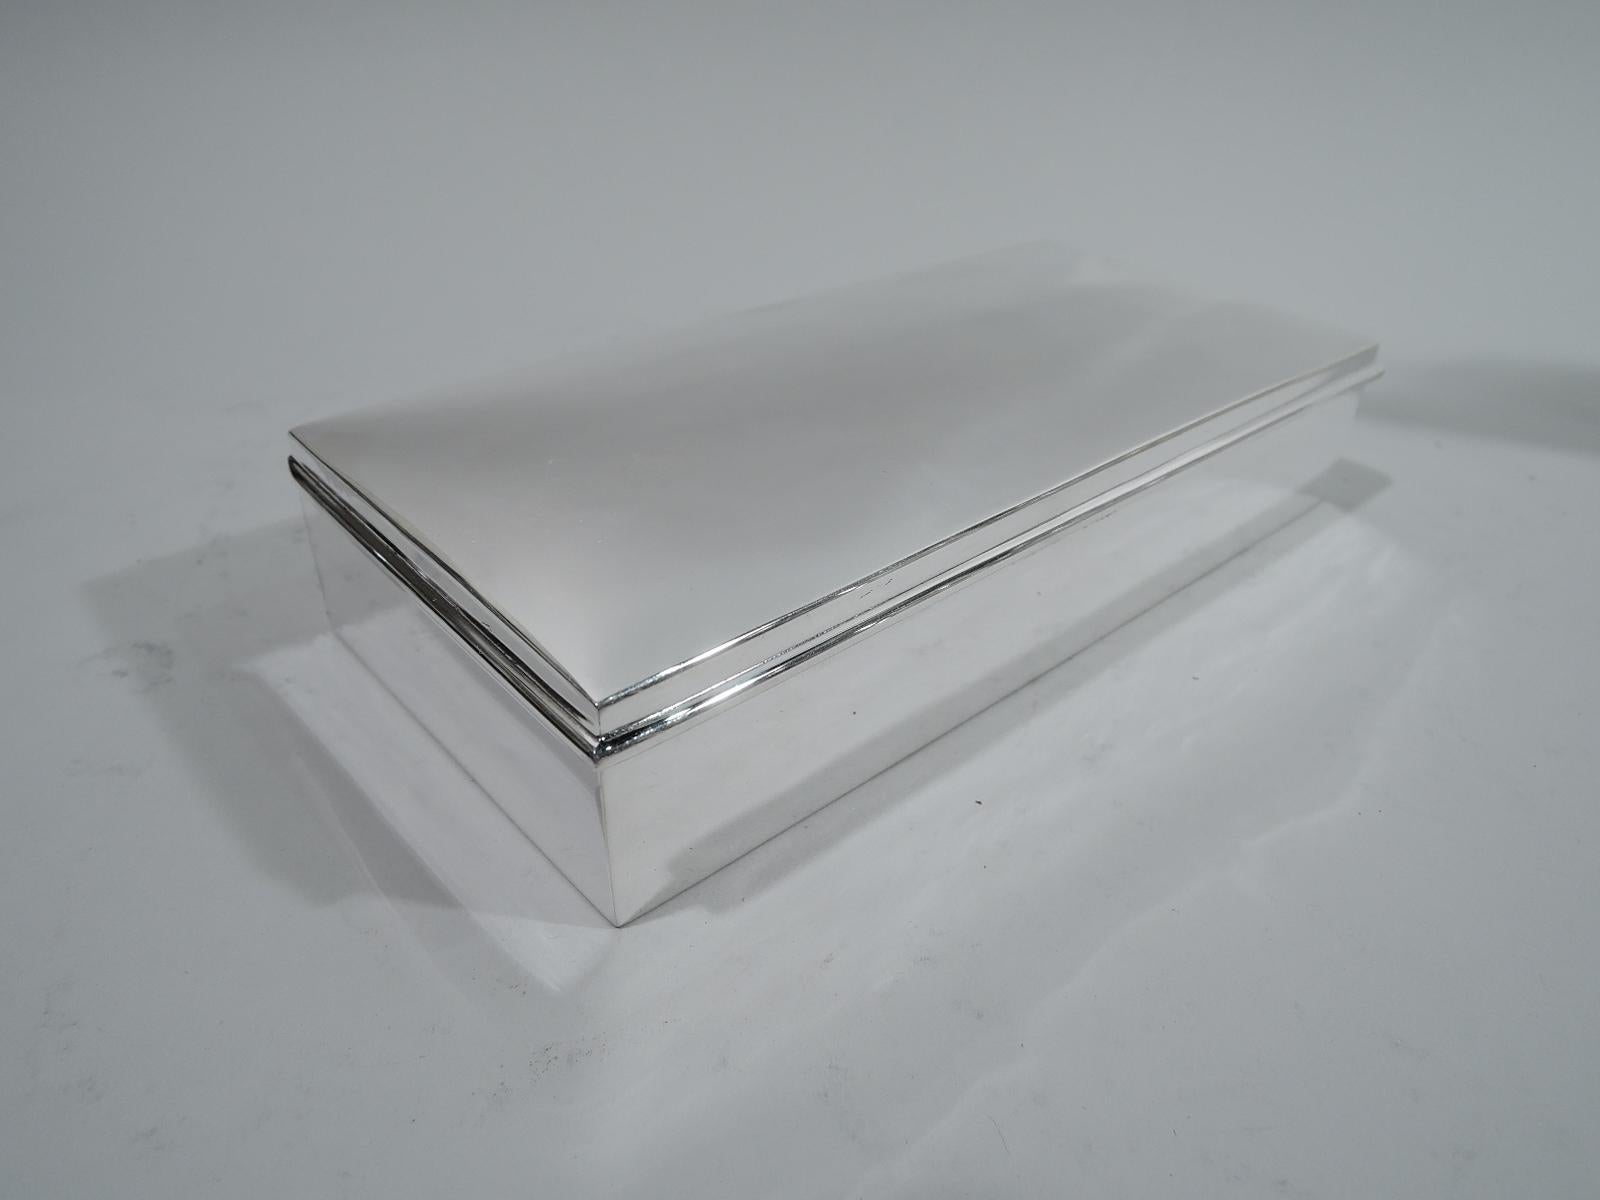 Mid-Century Modern sterling silver box. Rectangular with straight sides and crisp corners. Cover hinged and gently curved with overhanging wraparound rim. Box interior cedar lined and partitioned. Fully marked including no. 455 and stamp for Andrew